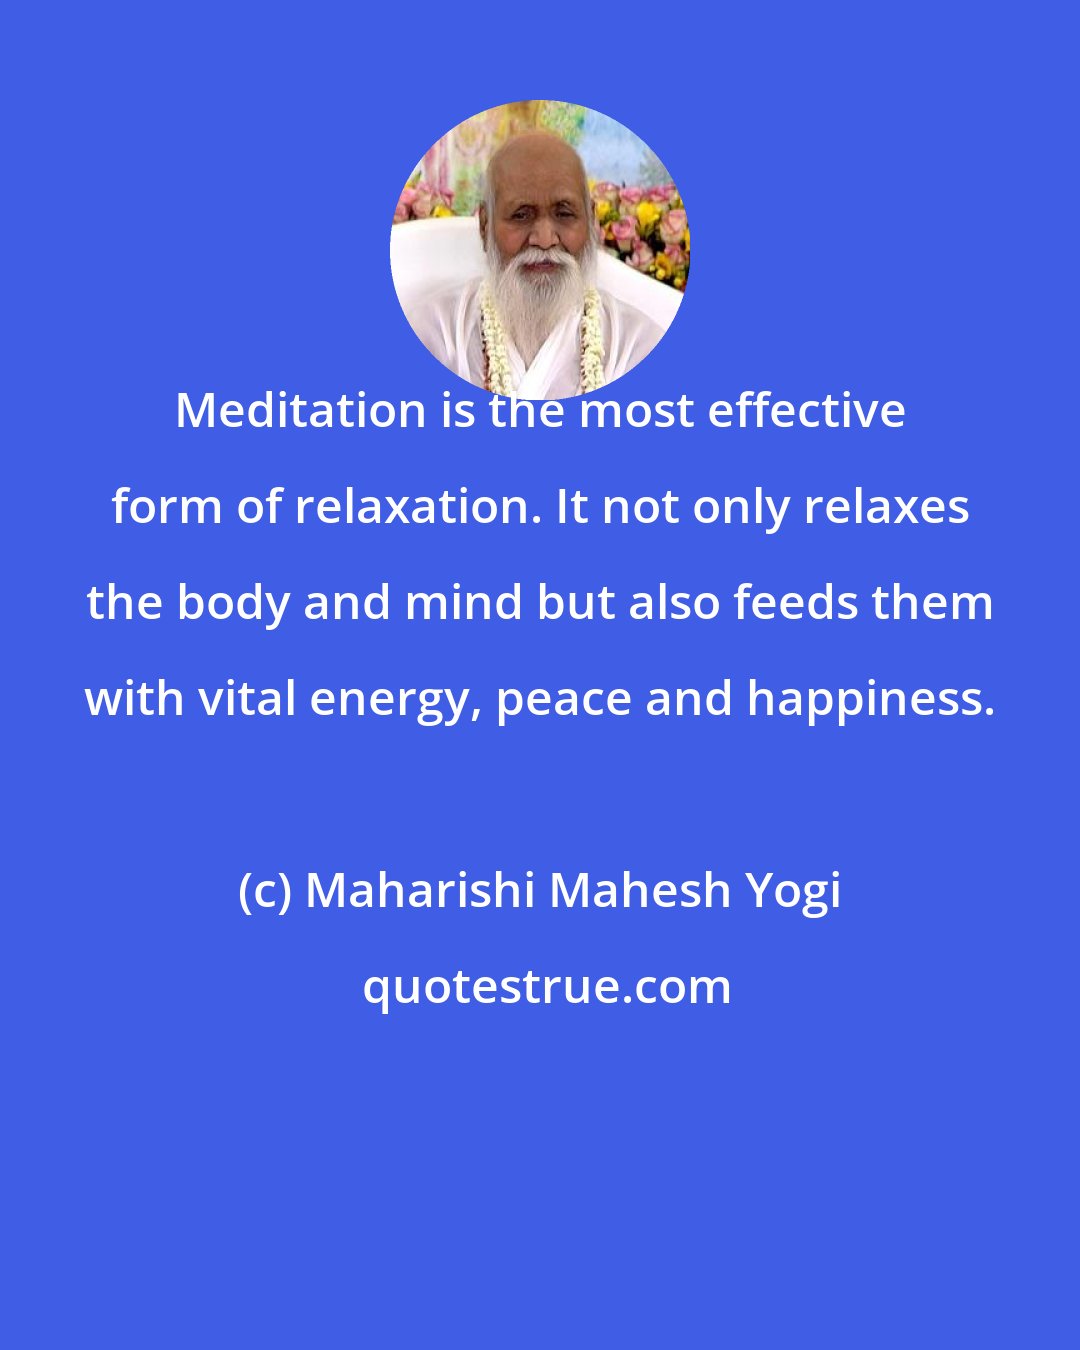 Maharishi Mahesh Yogi: Meditation is the most effective form of relaxation. It not only relaxes the body and mind but also feeds them with vital energy, peace and happiness.